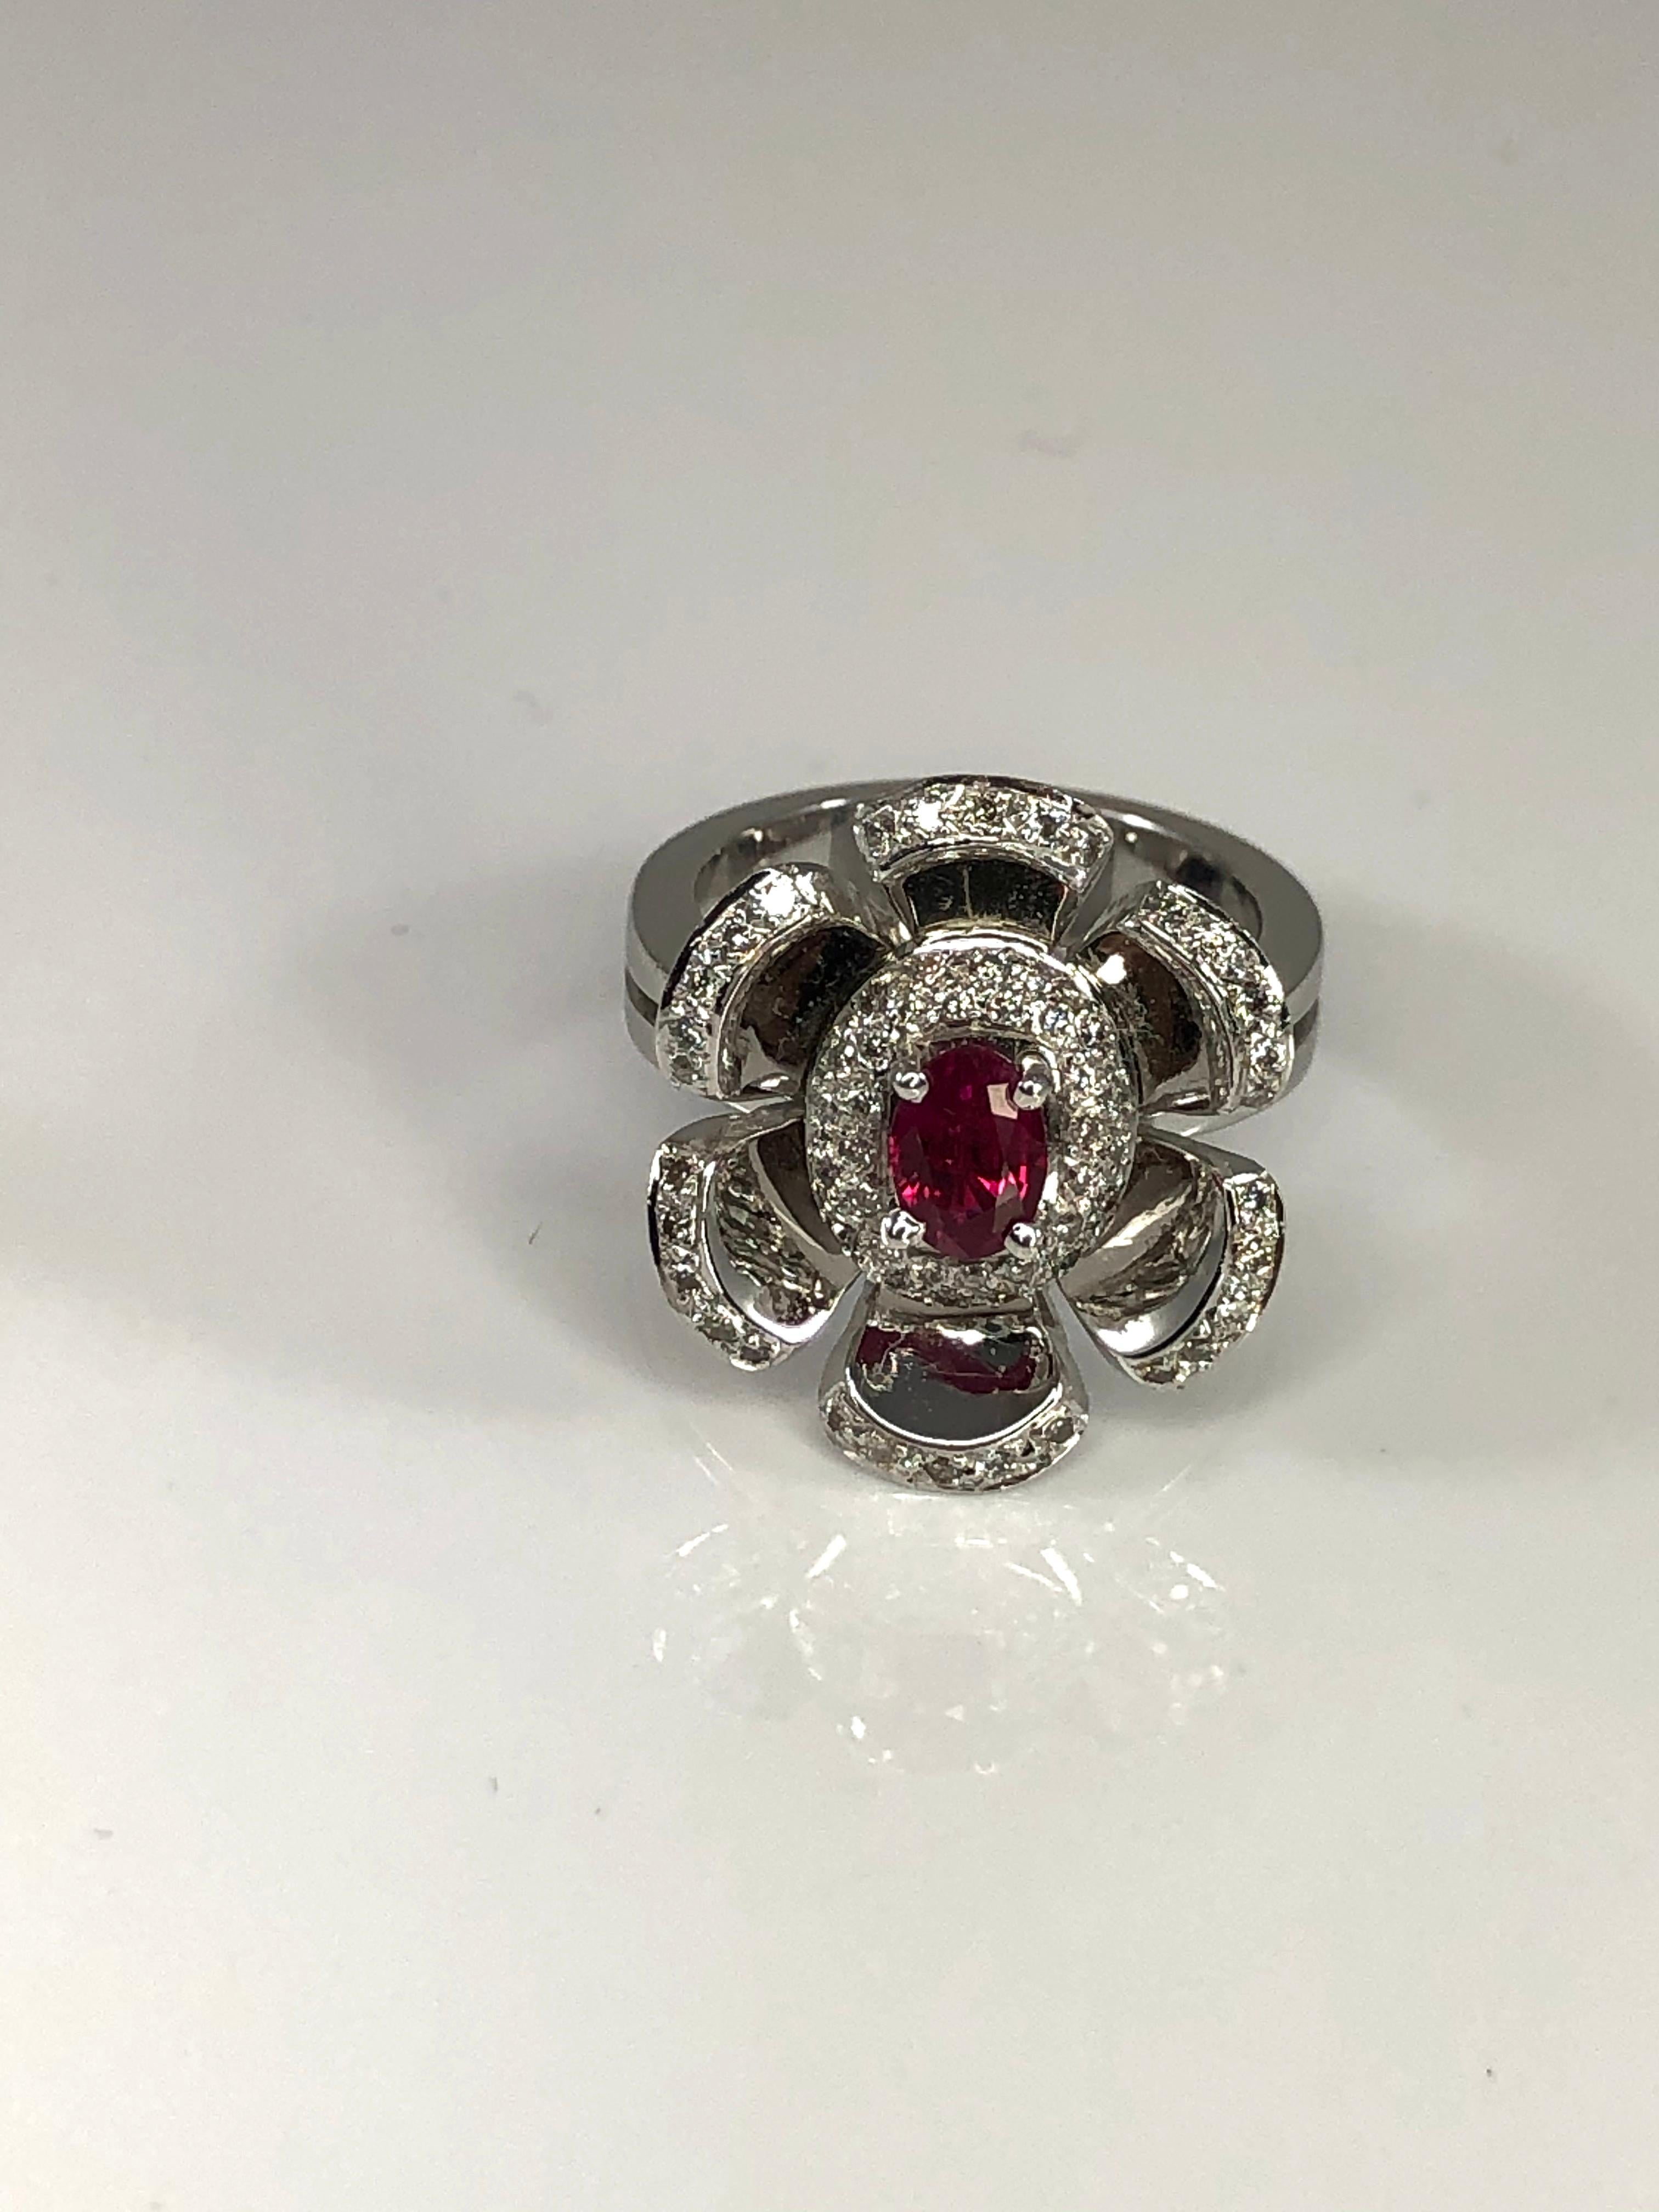 S.Georgios designer floral ring crafted from solid 18 Karat White Gold. This gorgeous piece features a 0.60 Carat oval cut Ruby center and flower petals decorated with 0.65-carat brilliant cut white Diamonds.  
The beautiful Ring can also be ordered